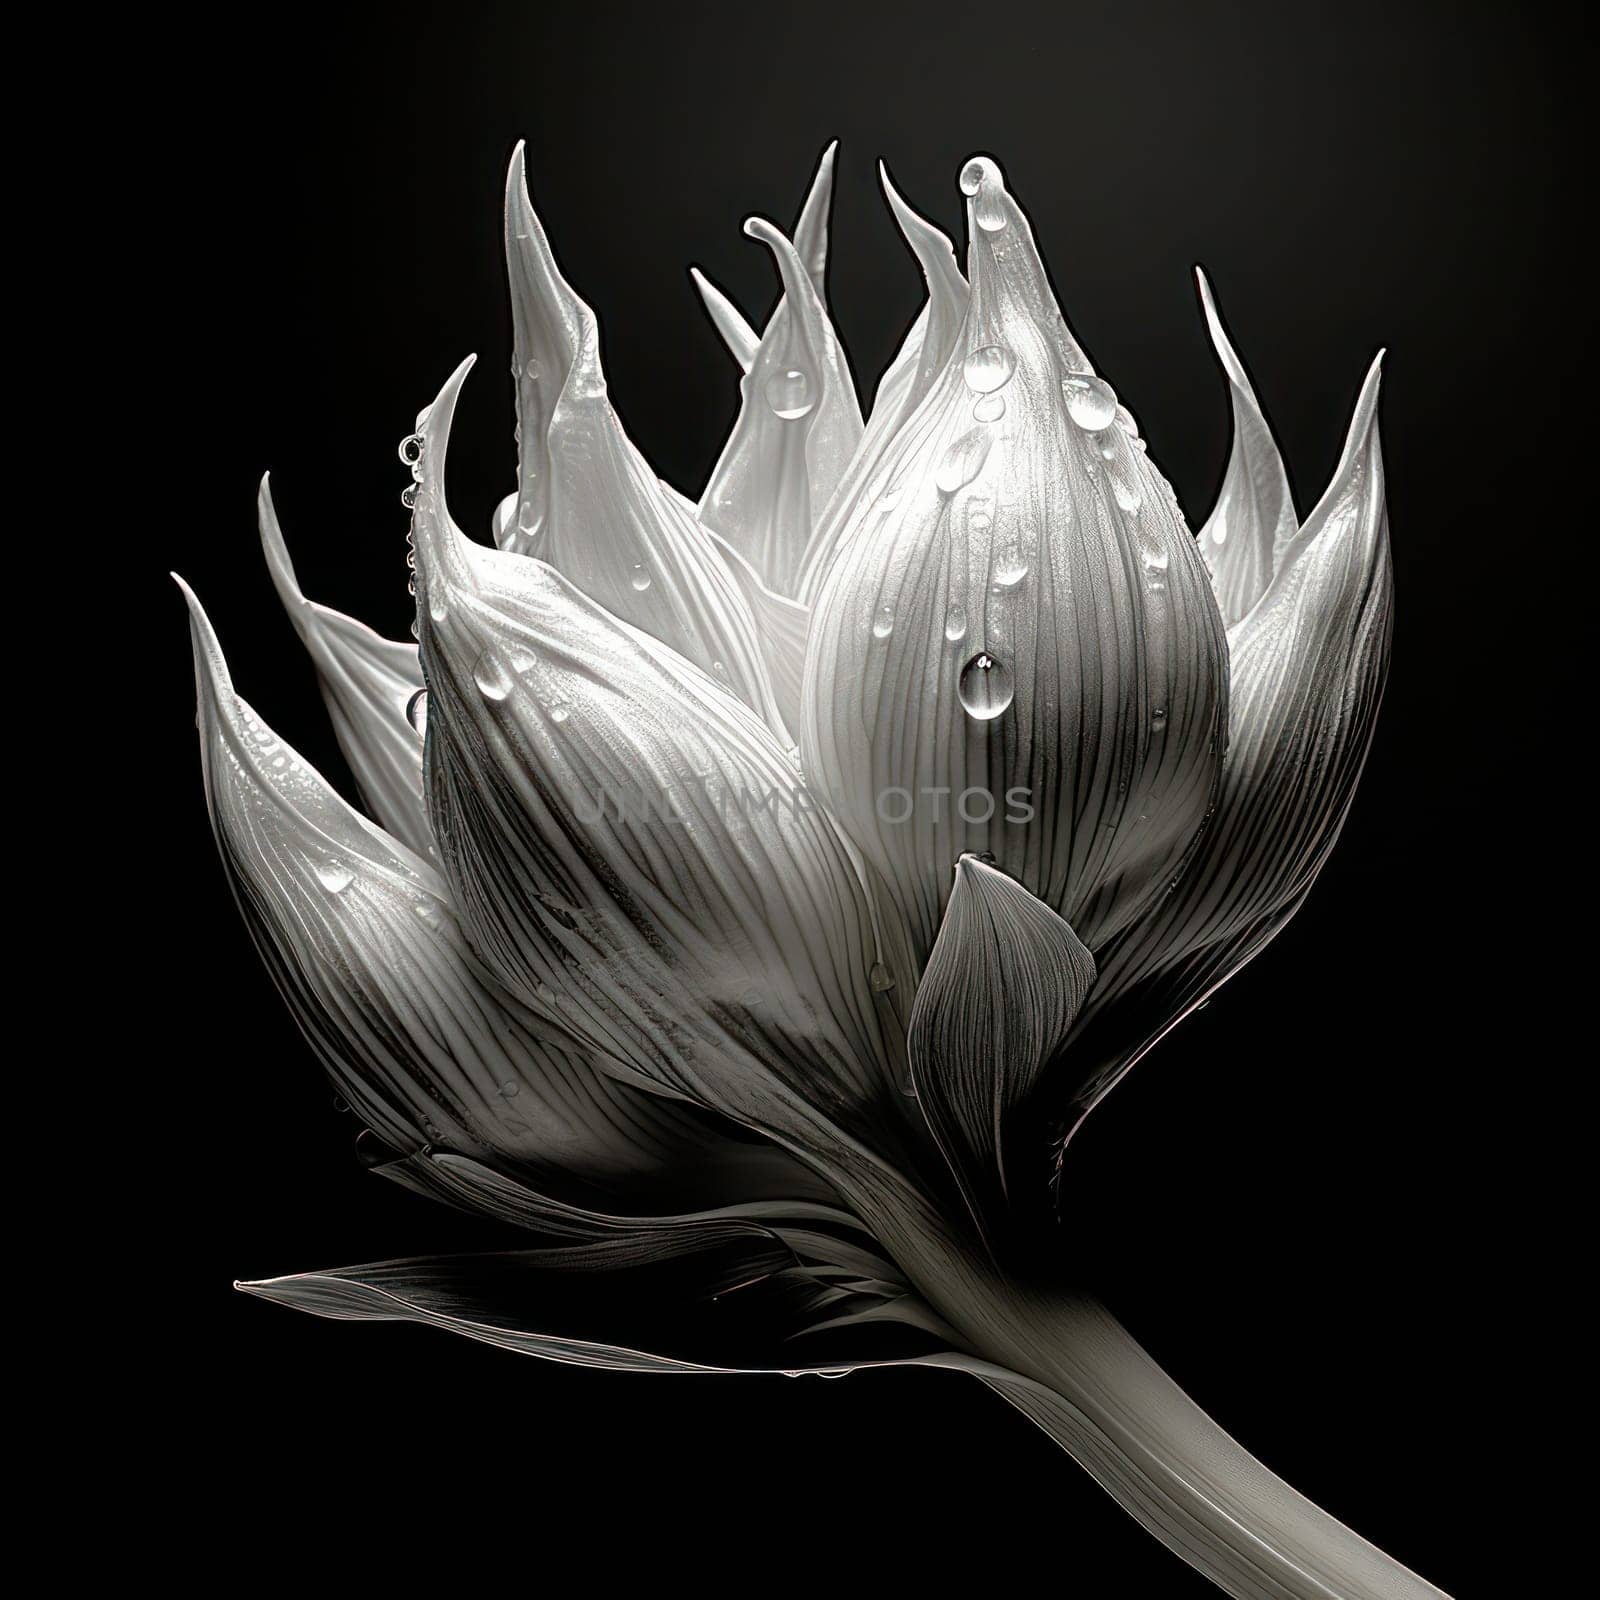 Floral Elegance: A Serene White Blooming Lotus, Embracing Nature's Beauty and Tranquility on a Bright Summer Day by Vichizh